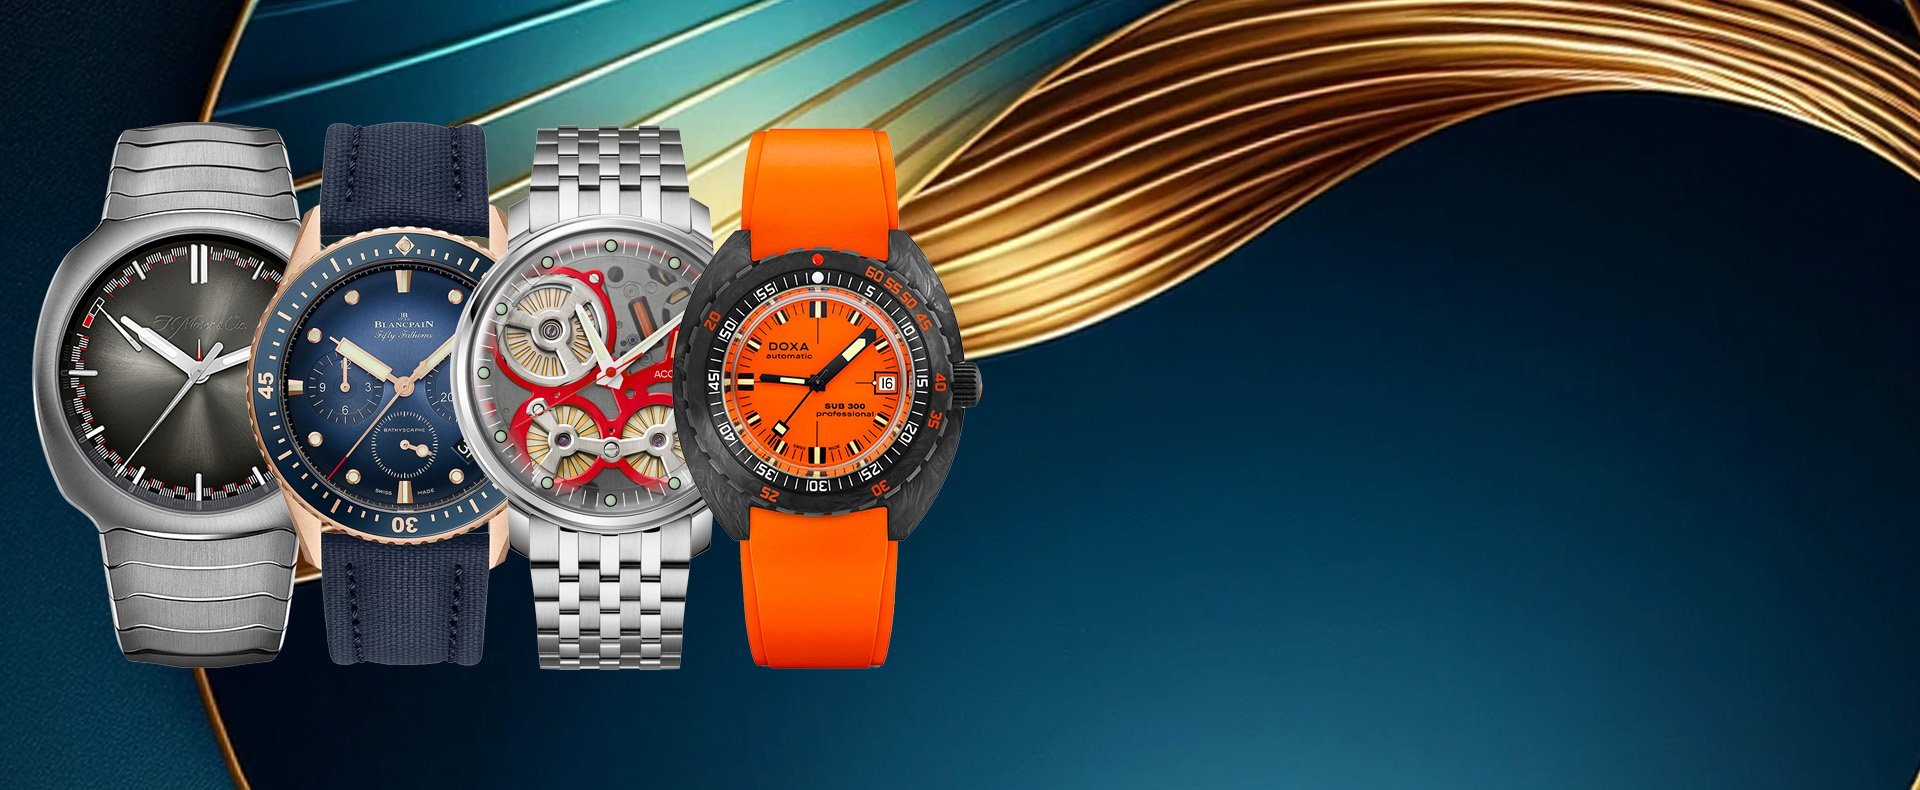 Seiko 5 Sports celebrates 55 years with four new creations paying homage to  its origins.